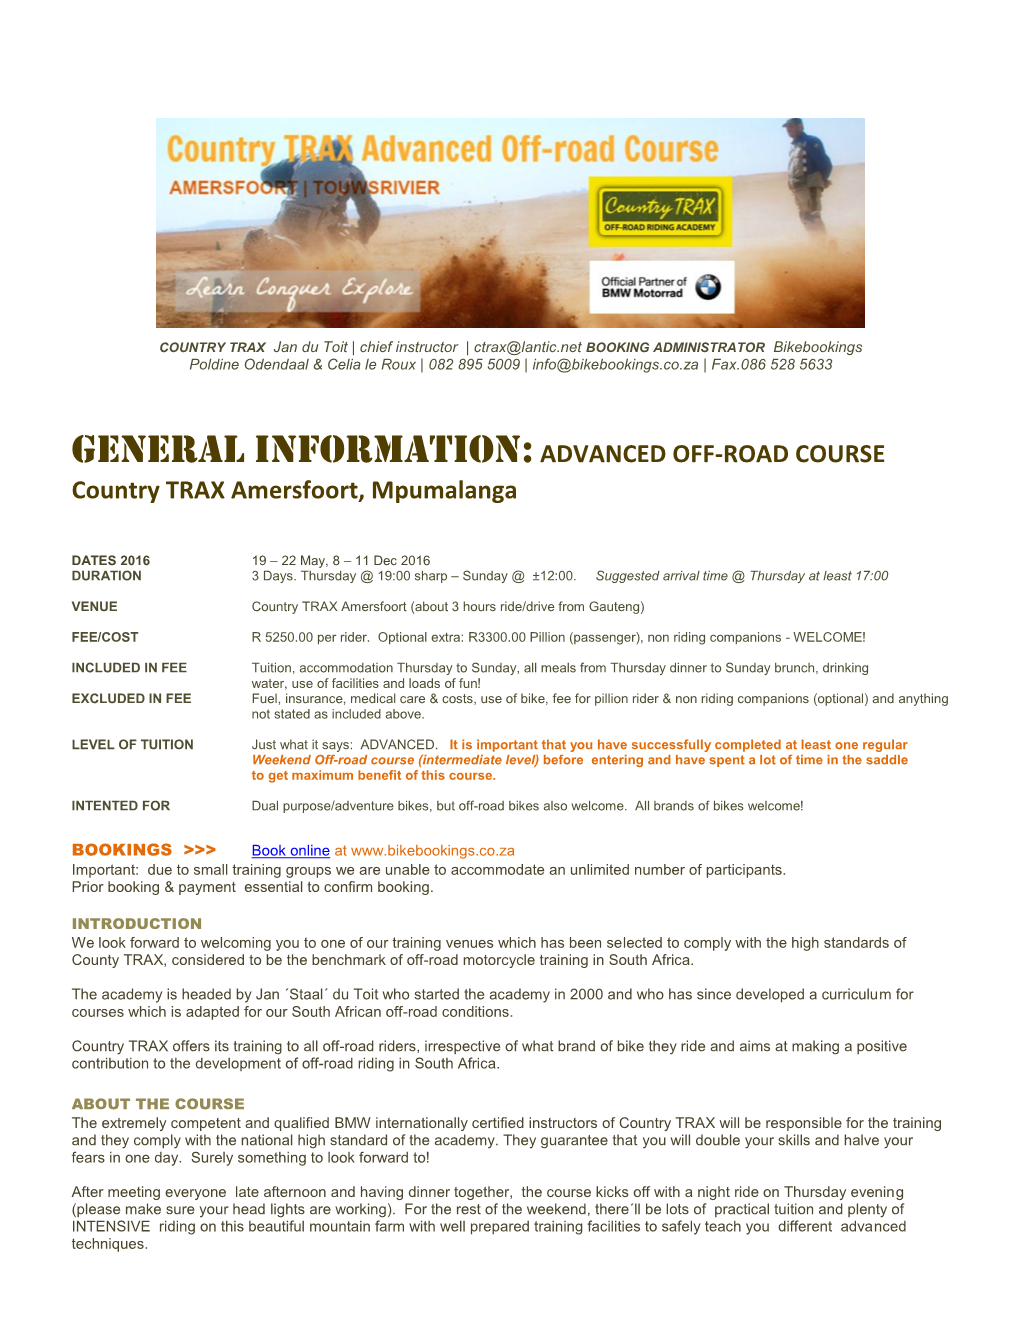 General Information:ADVANCED OFF-ROAD COURSE